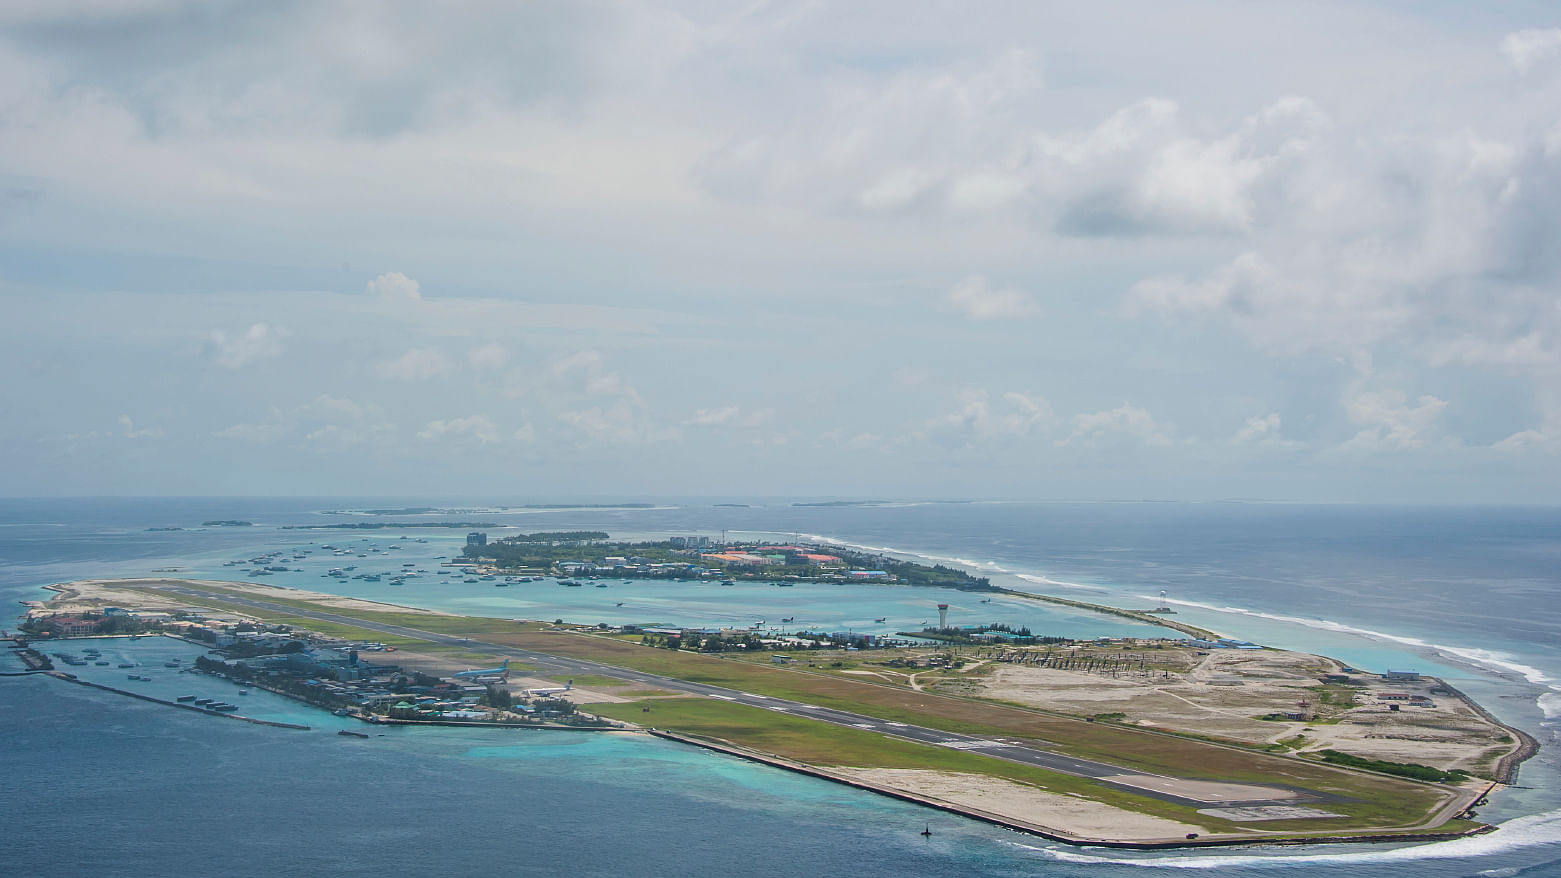 India reacts in fear as Maldives land law brings China to the Indian Ocean. &nbsp;(Photo: iStock)